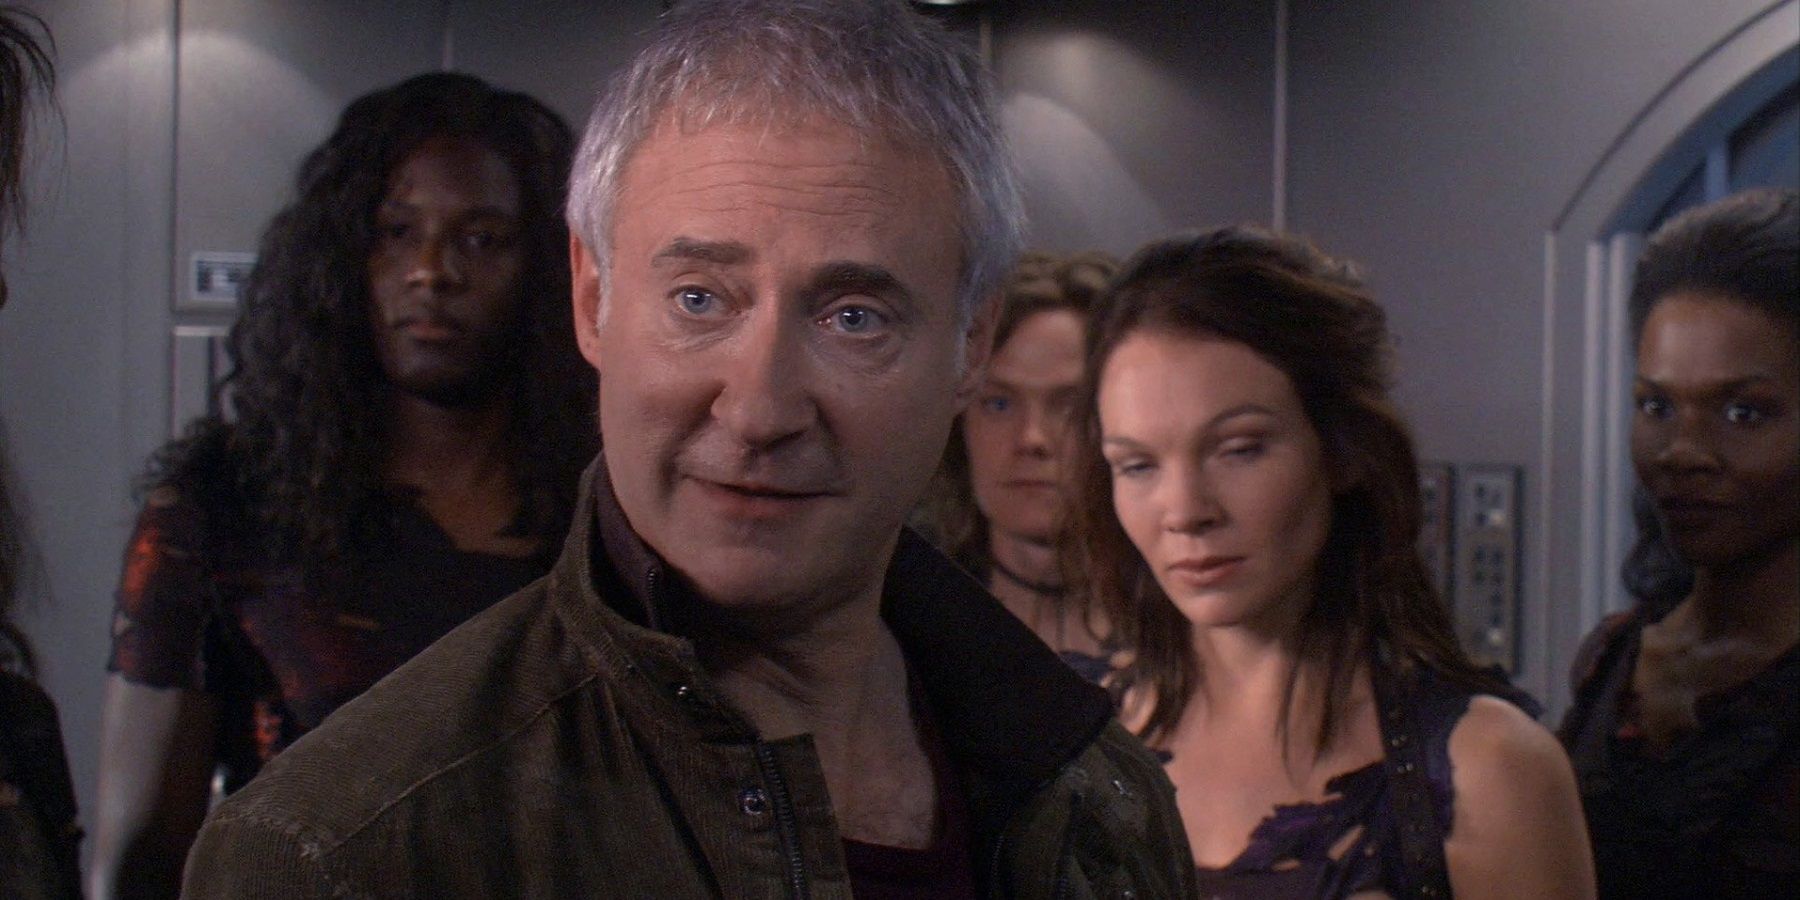 Brent Spiner as Arik Soong standing in the NX-01 Enterprise Corridor with augments